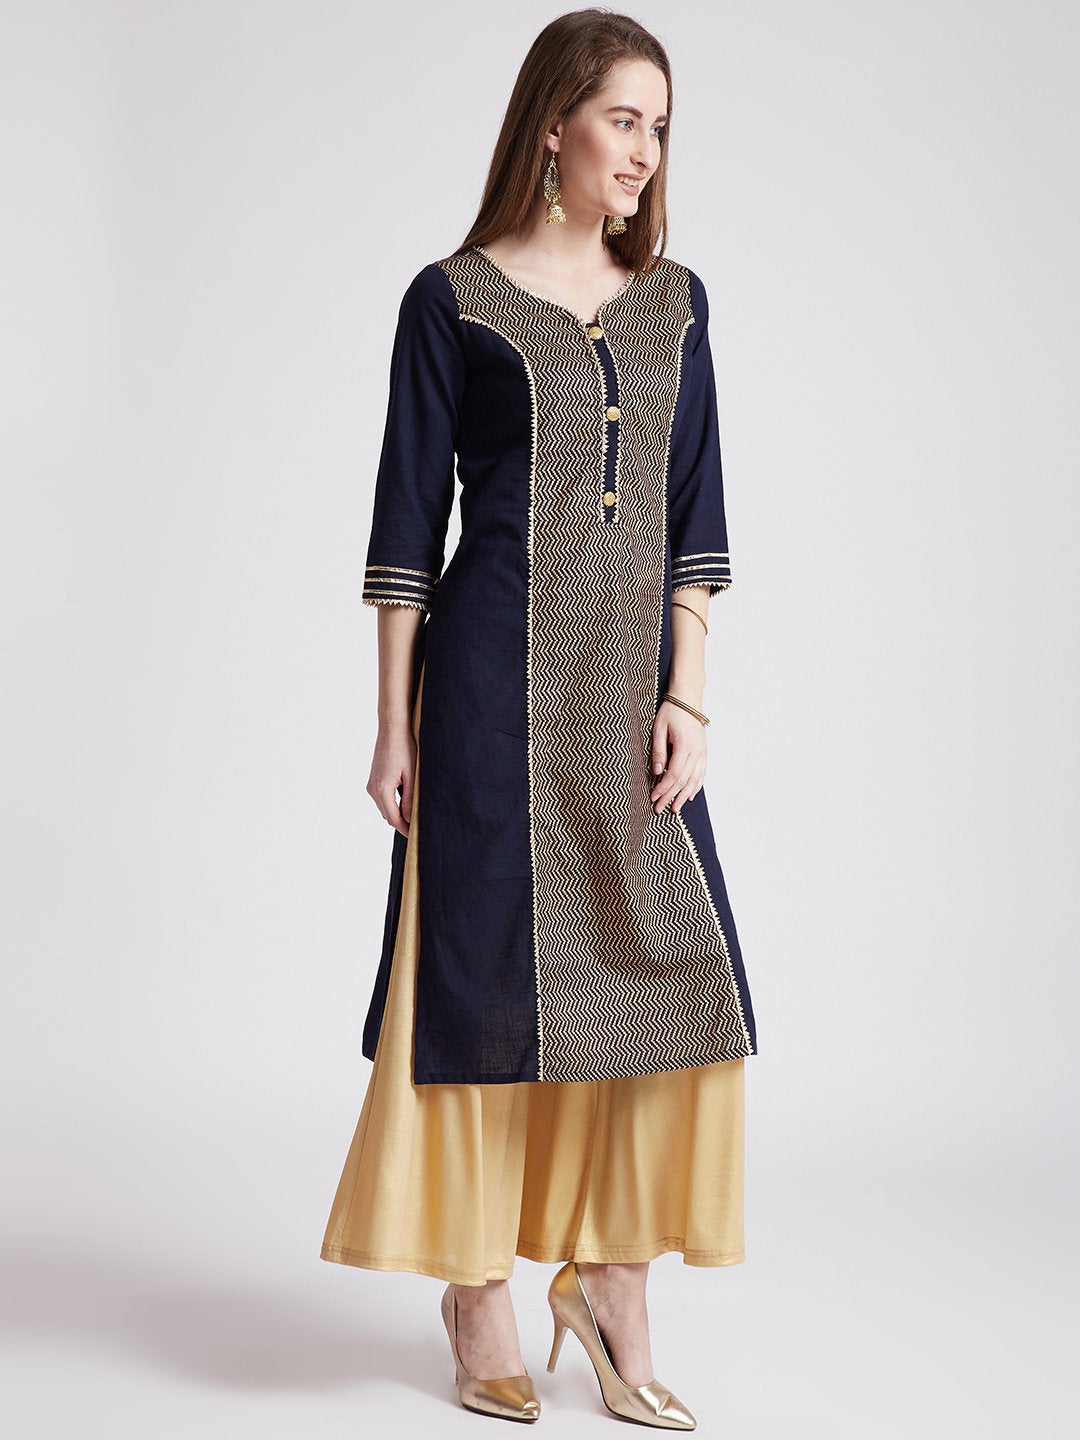 Indian ethnic long kurta in navy blue colour with gota detailing